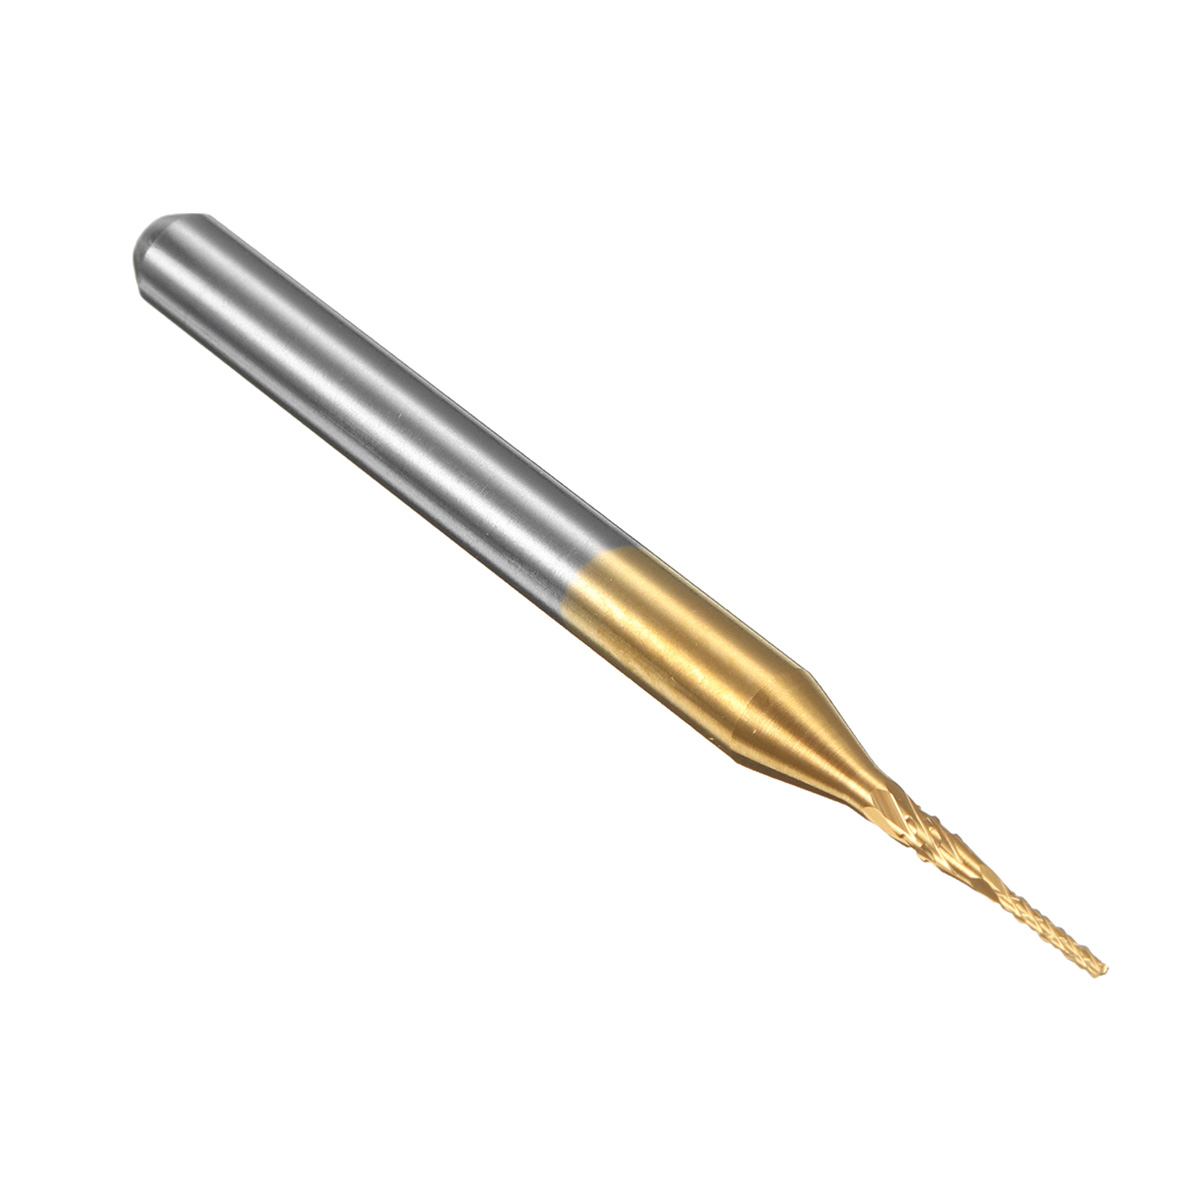 Drillpro-10pcs-07mm-Carbide-End-Mill-Cutter-Titanium-Coated-Engraving-Milling-Cutter-1532217-7